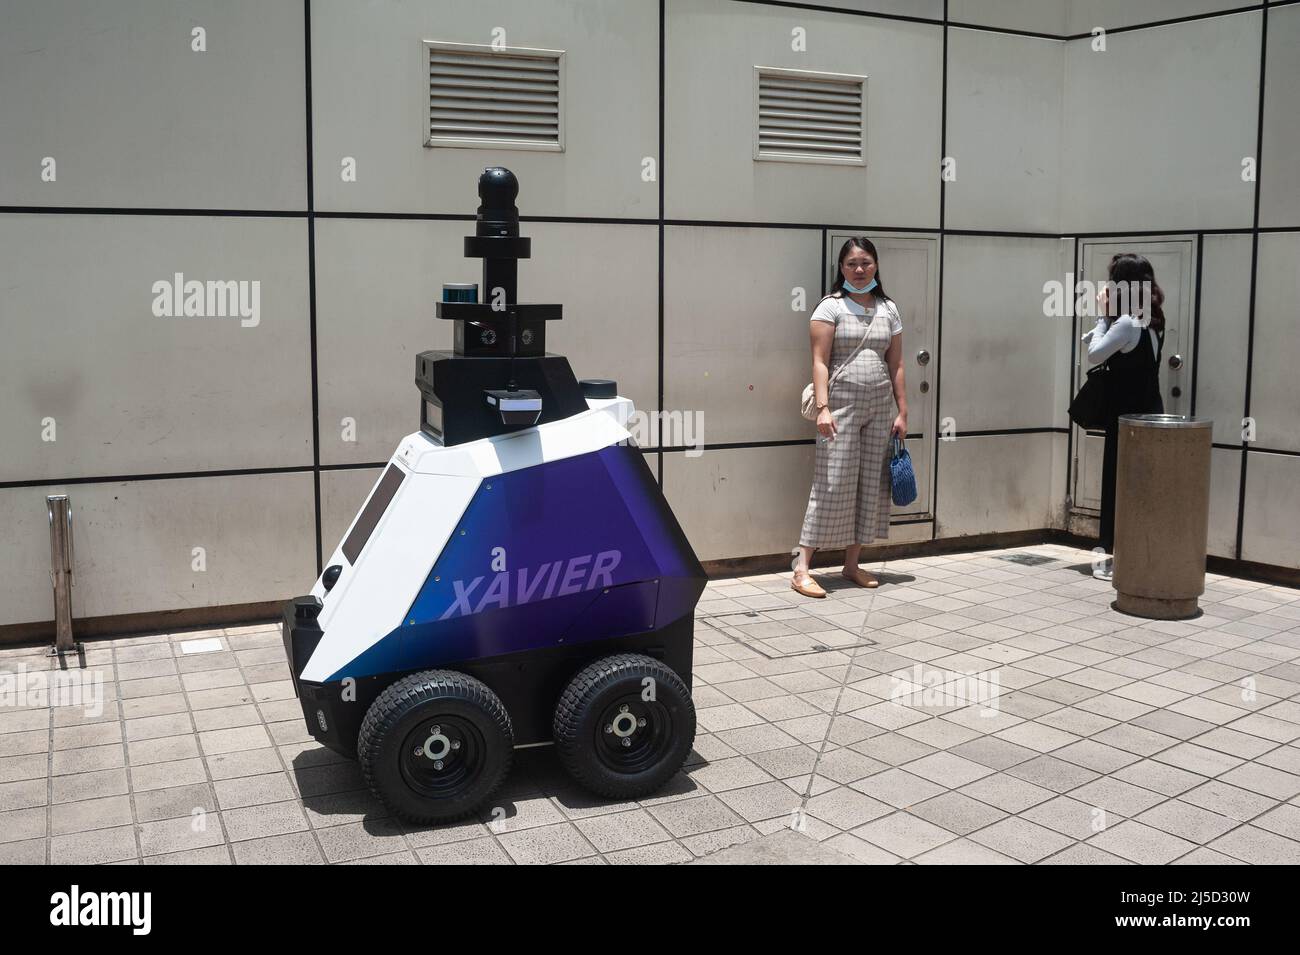 Sept. 15, 2021, Singapore, Republic of Singapore, Asia - An autonomous robot  named Xavier from developer HTX (Home Team Science and Technology Agency)  commissioned by the Ministry of Home Affairs, patrols outside